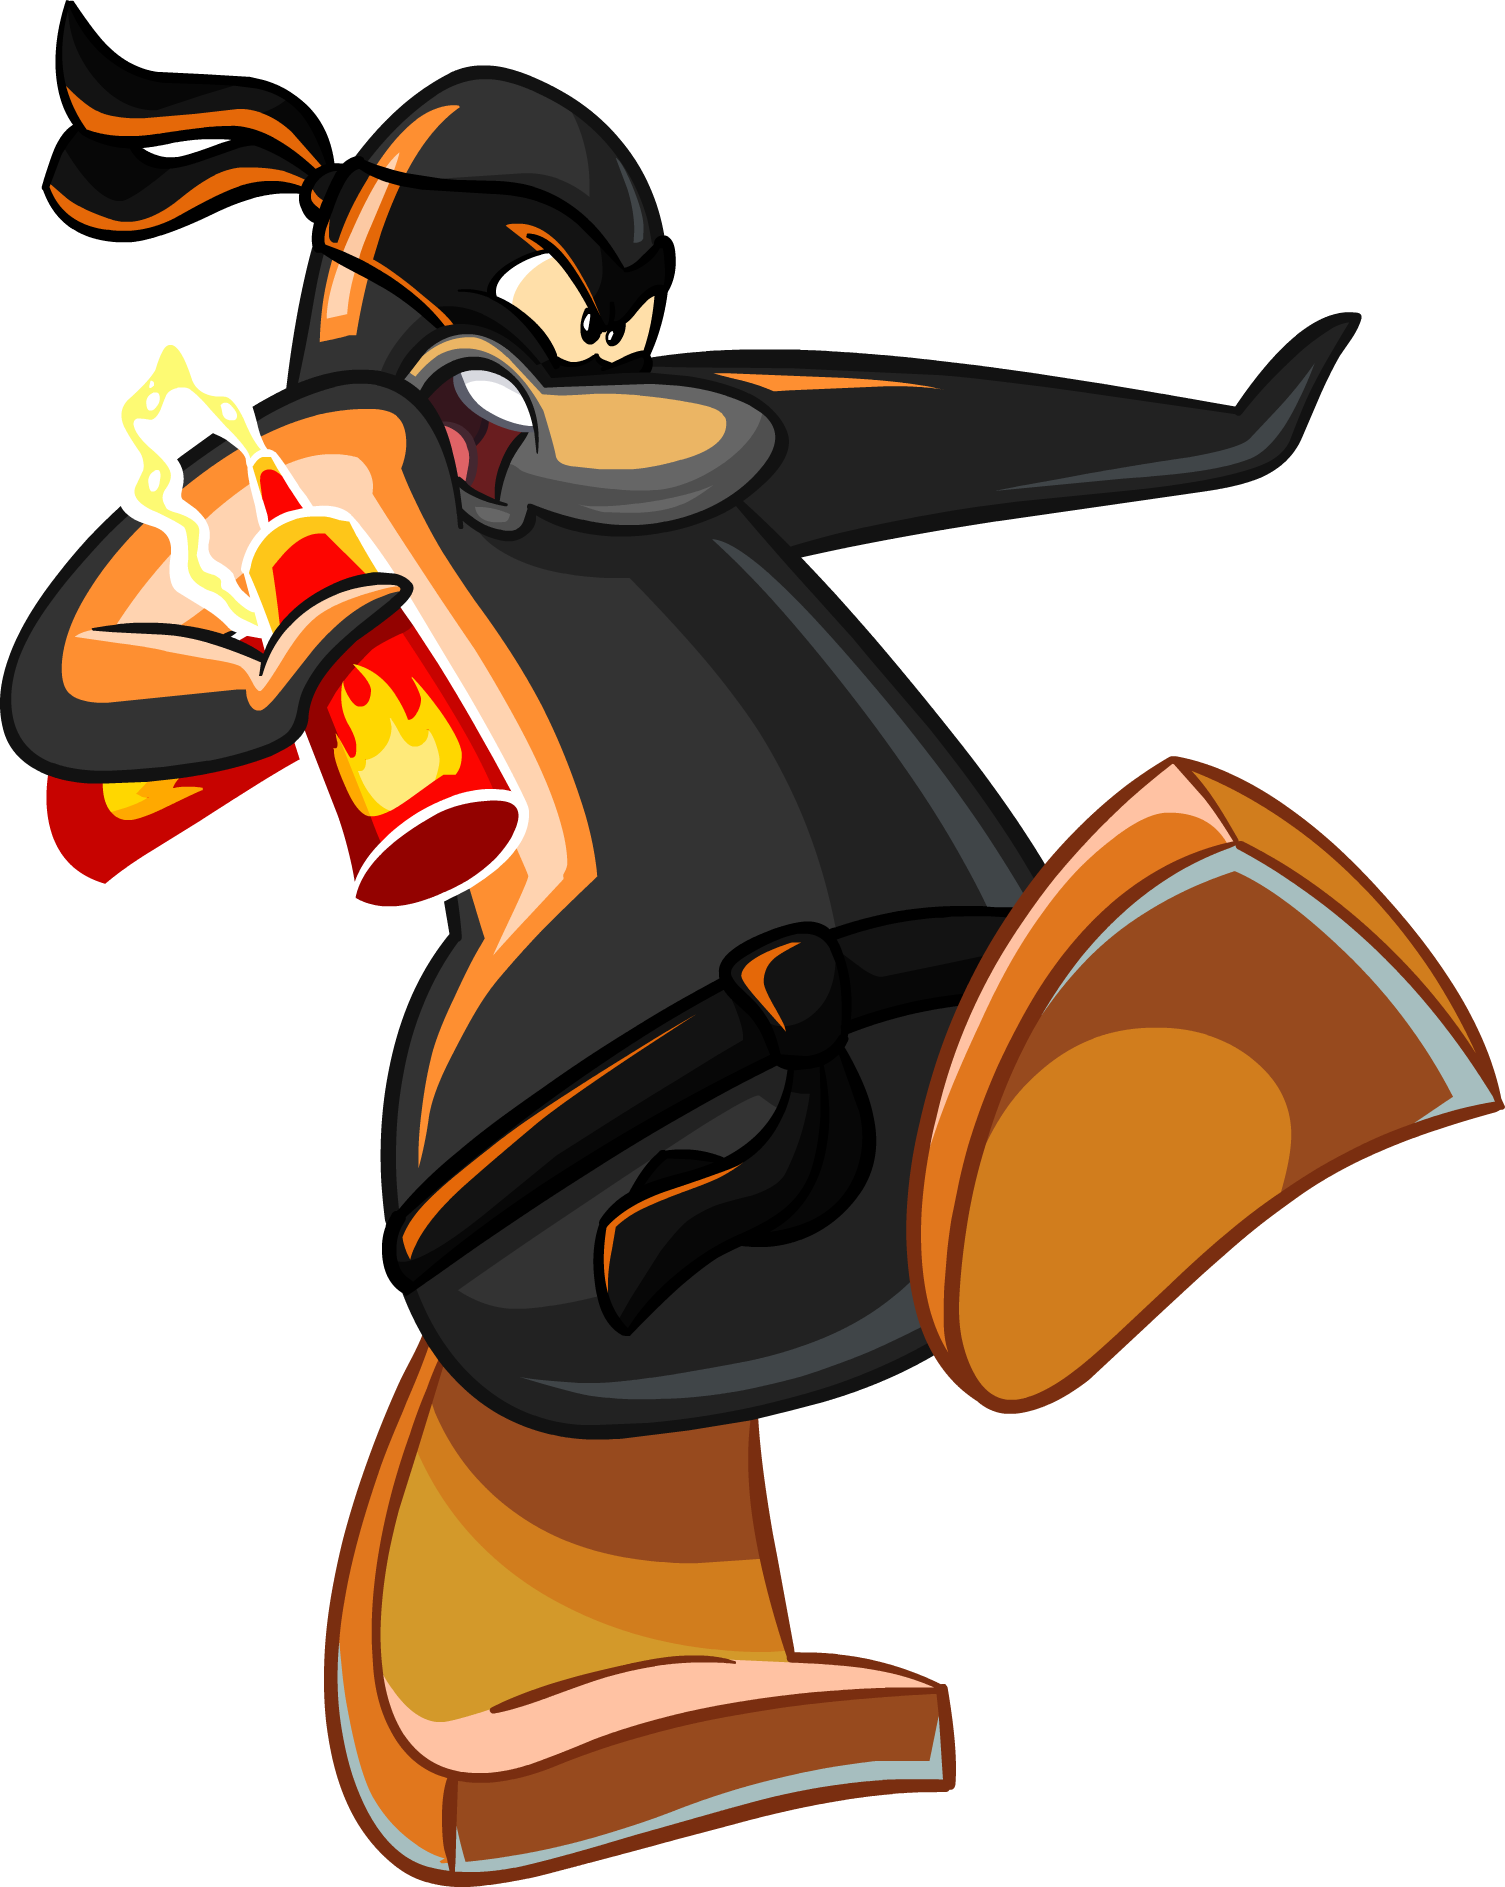 Image Penguin1854 Png Club Penguin Wiki Fandom Powered By Wikia